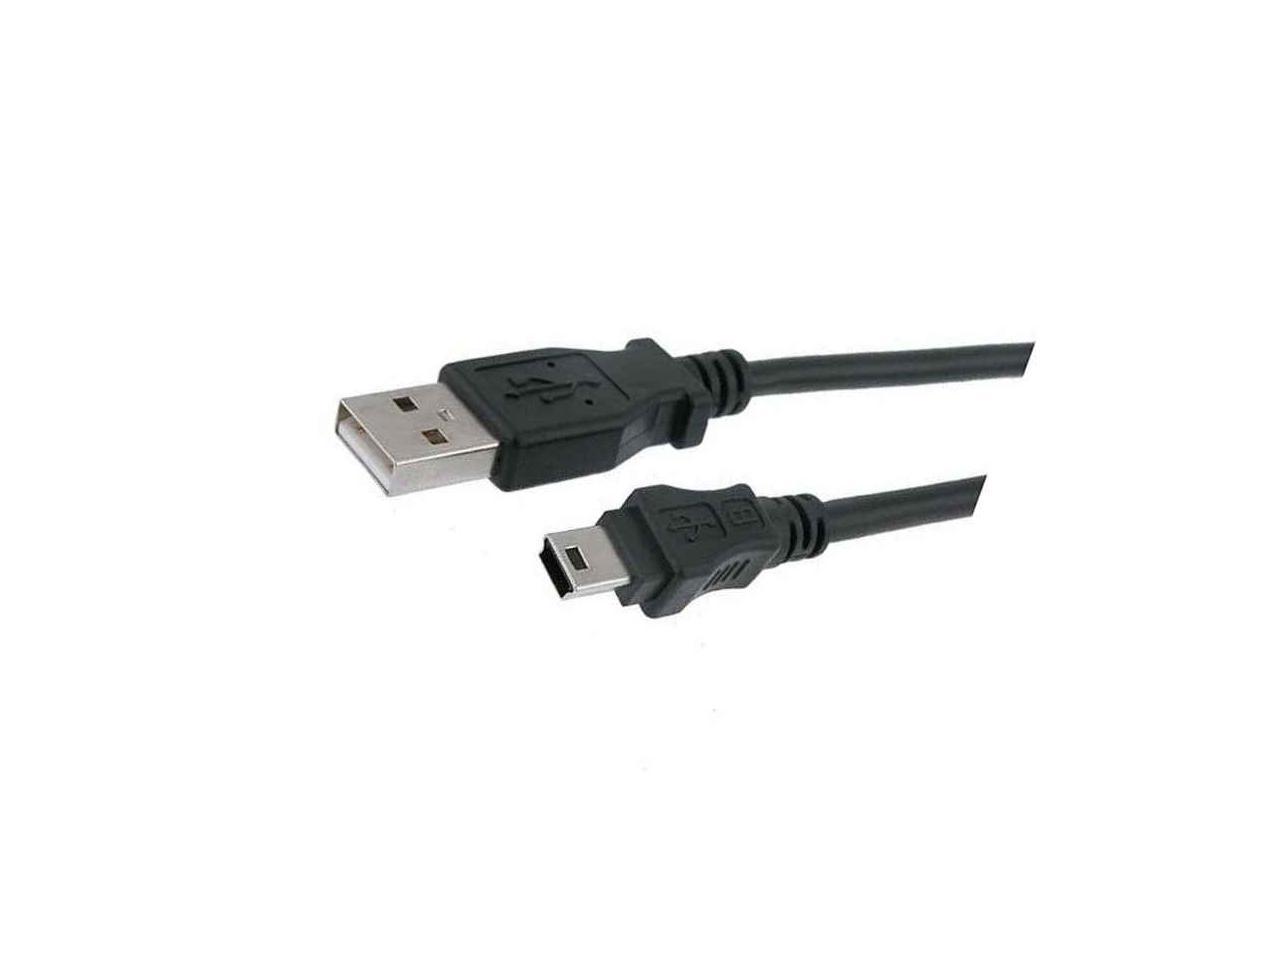 LEAD FOR PC AND MAC SONY  DSC-S85,DSC-S500 CAMERA USB DATA SYNC CABLE 